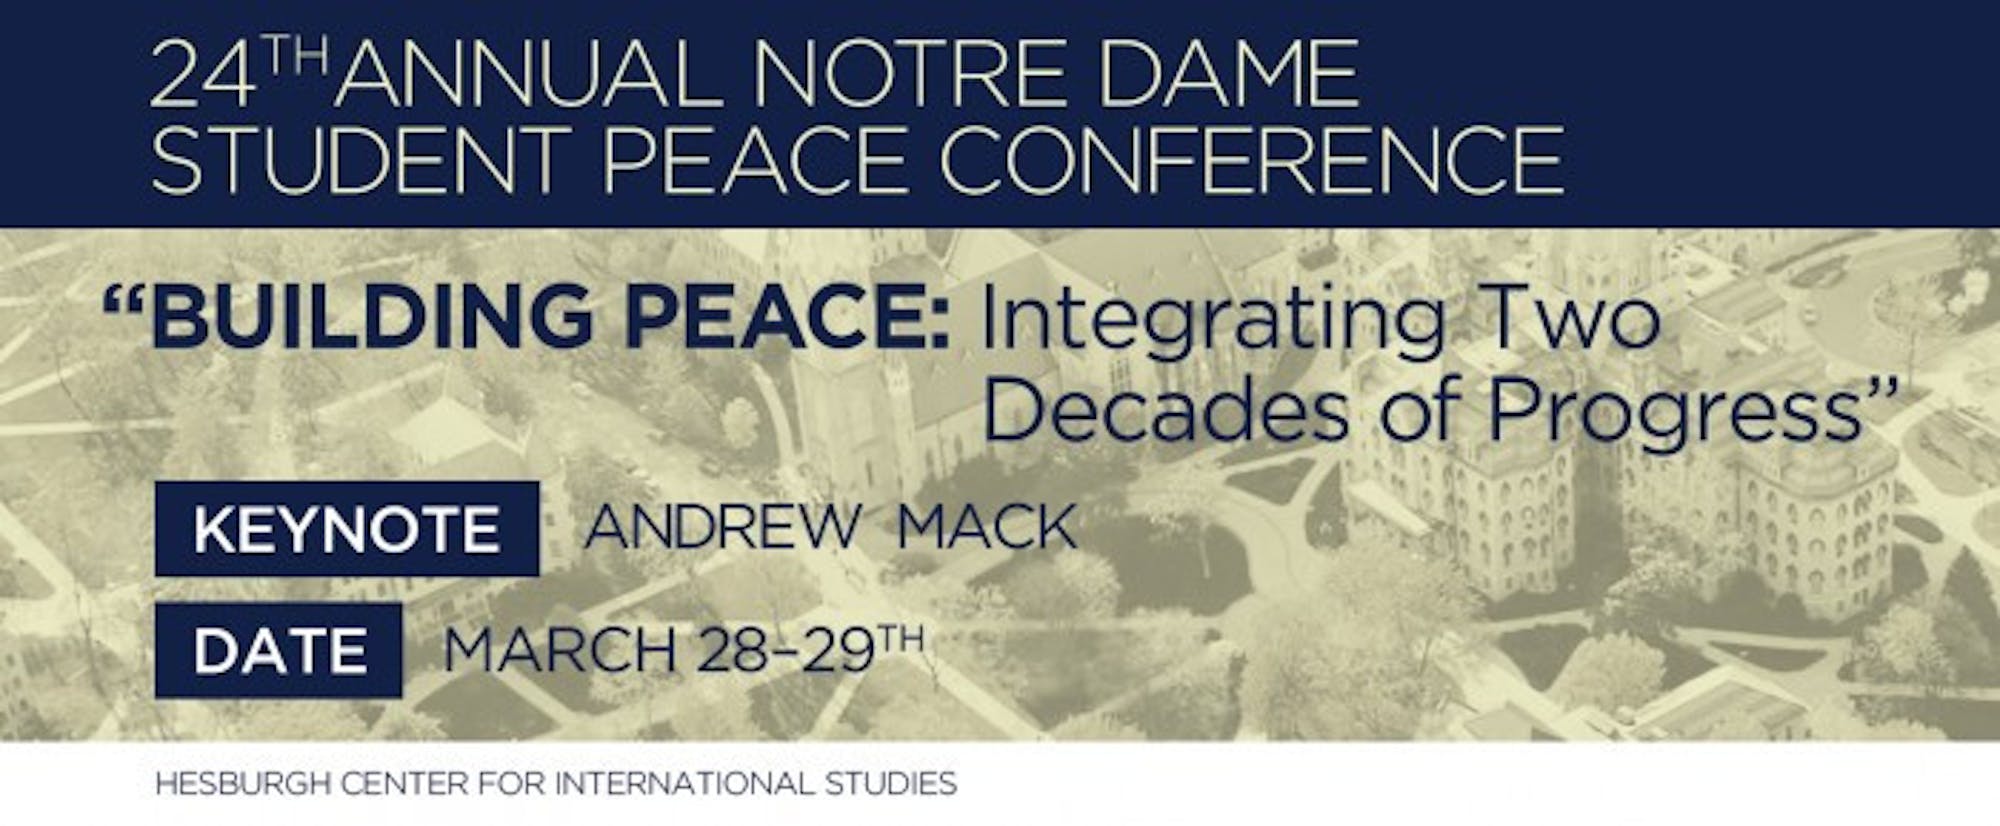 StudentPeaceConference_WEB